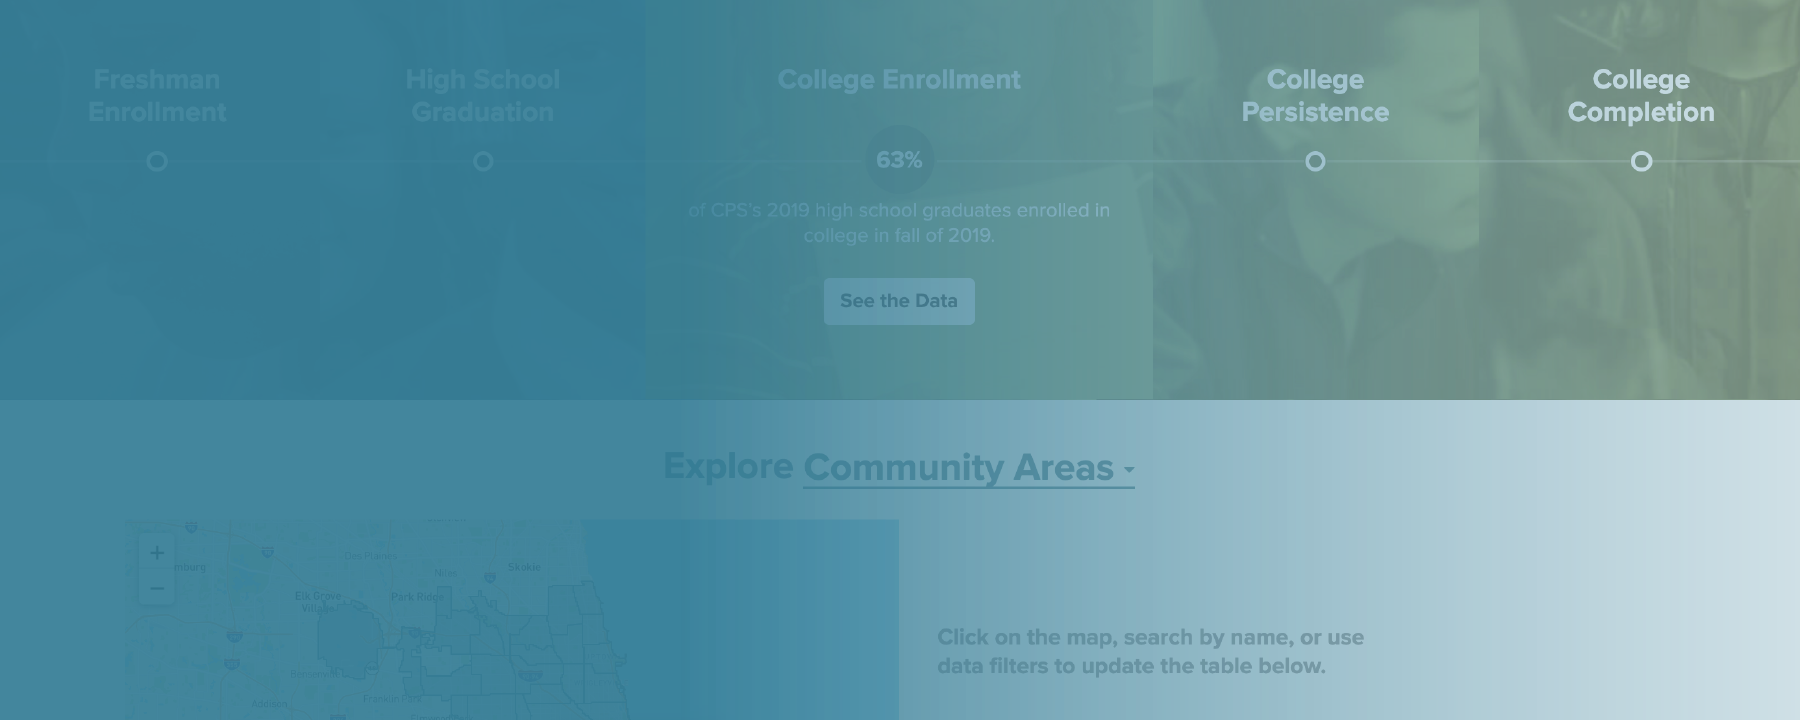 CPS data on students' high school graduation rate and college graduation rate and their immediate college enrollment rate by neighborhood Chicago Public School statistics by community area